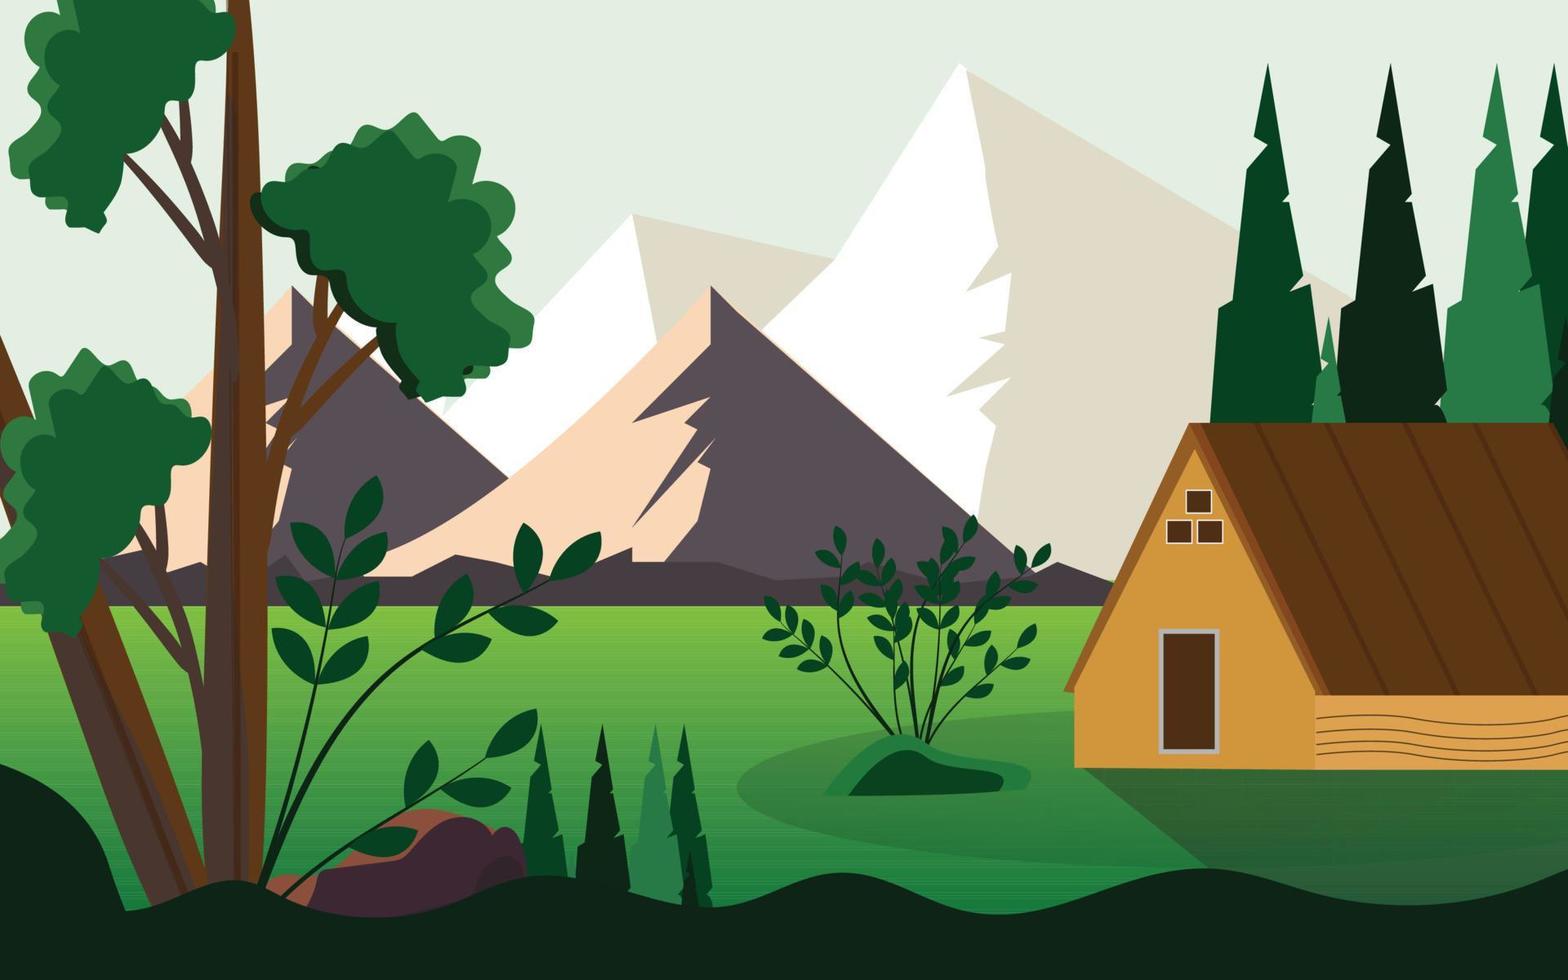 Summer Scene With Mountains and Green Field And House Landscape Illustration vector